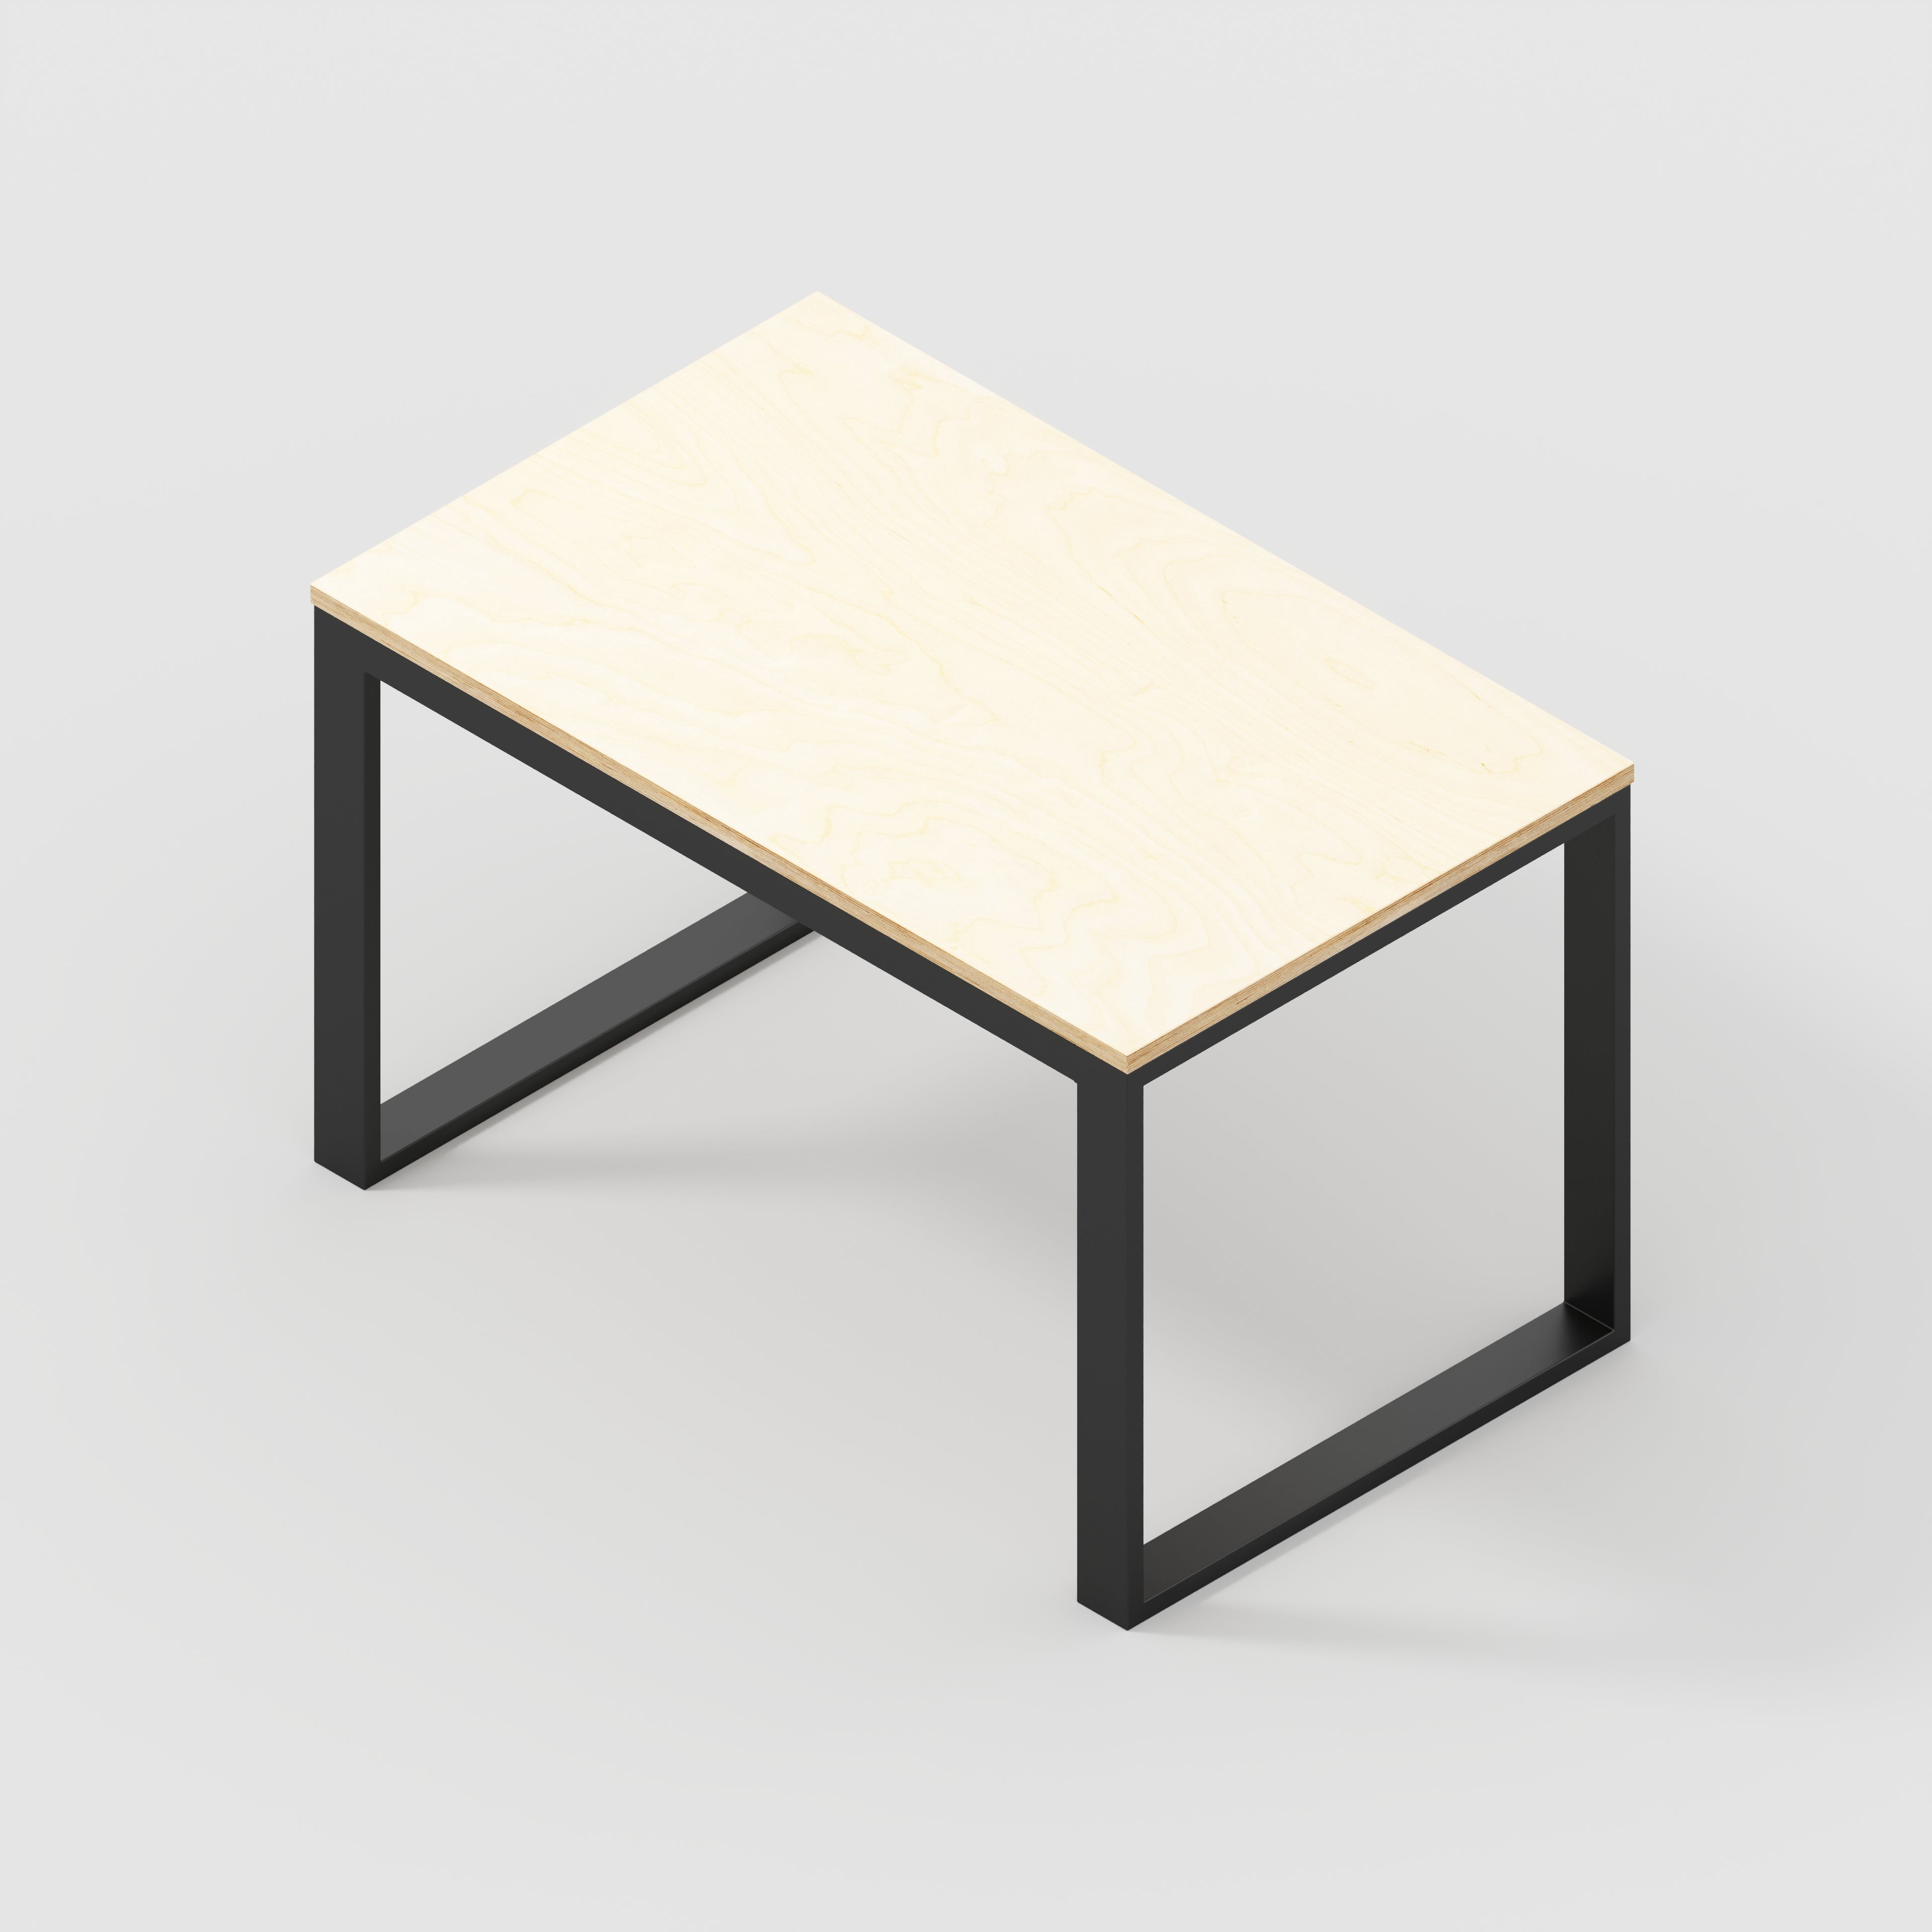 Table with Black Industrial Frame - Plywood Birch - 1200(w) x 745(d) x 735(h)